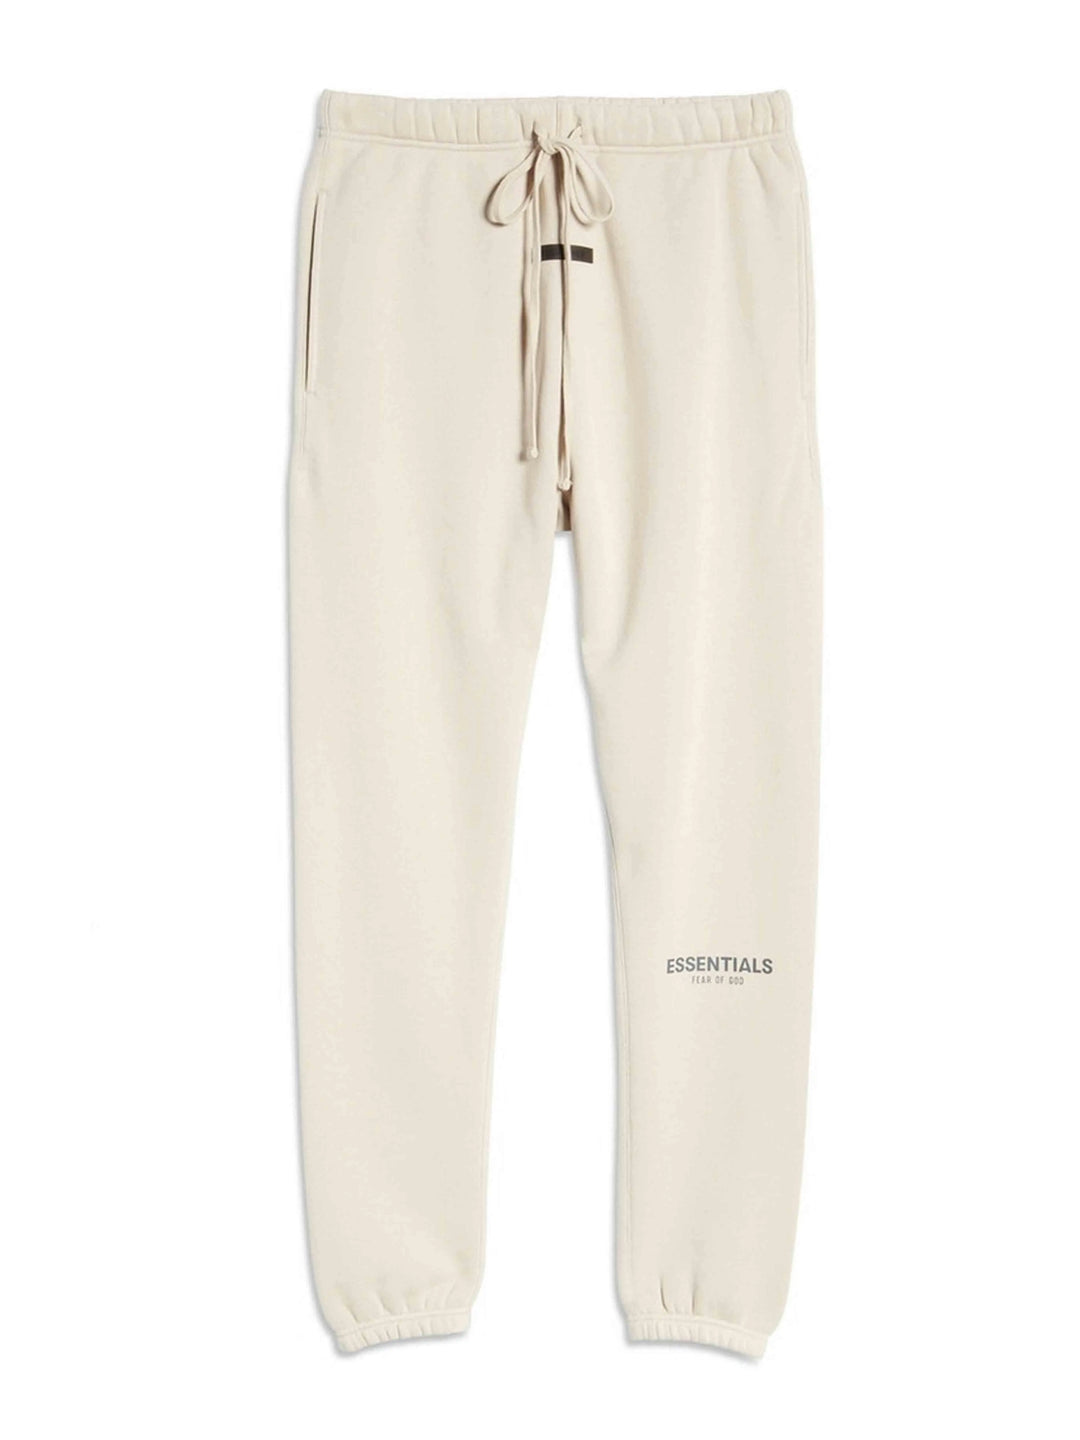 Fear Of God Essentials Sweatpants Stone/Oat [SS21] Prior